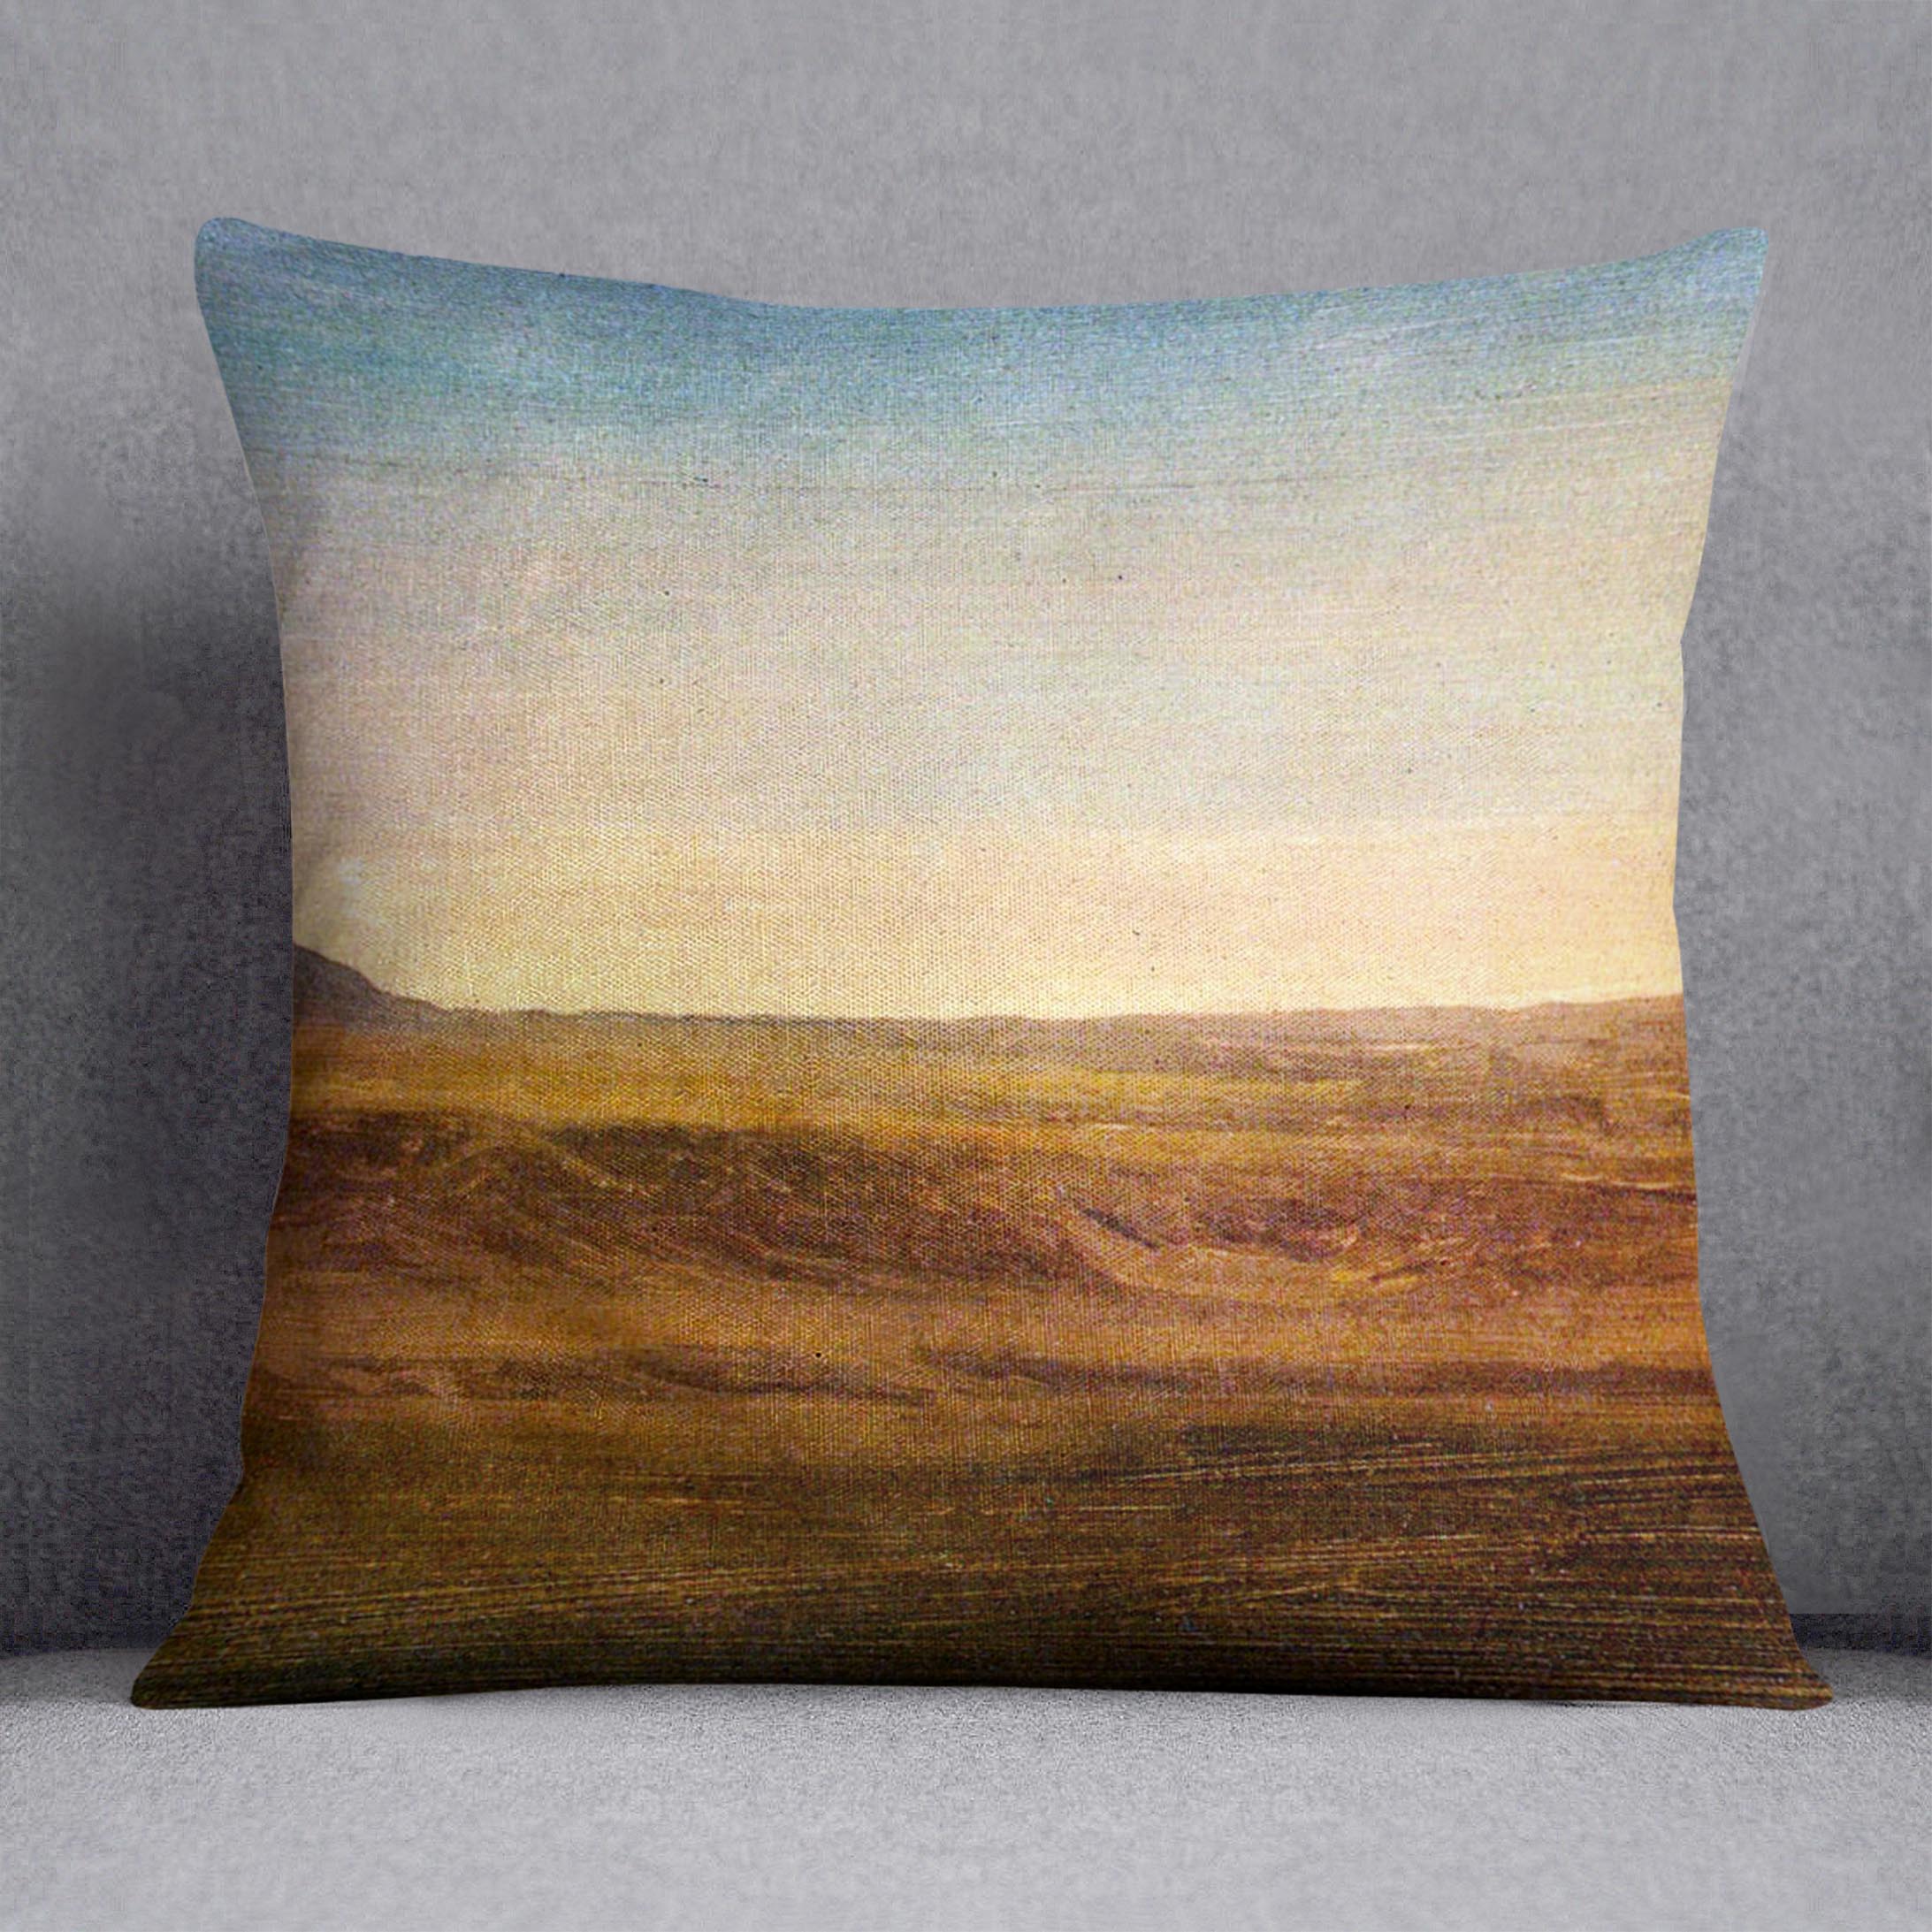 At the Level by Bierstadt Cushion - Canvas Art Rocks - 1